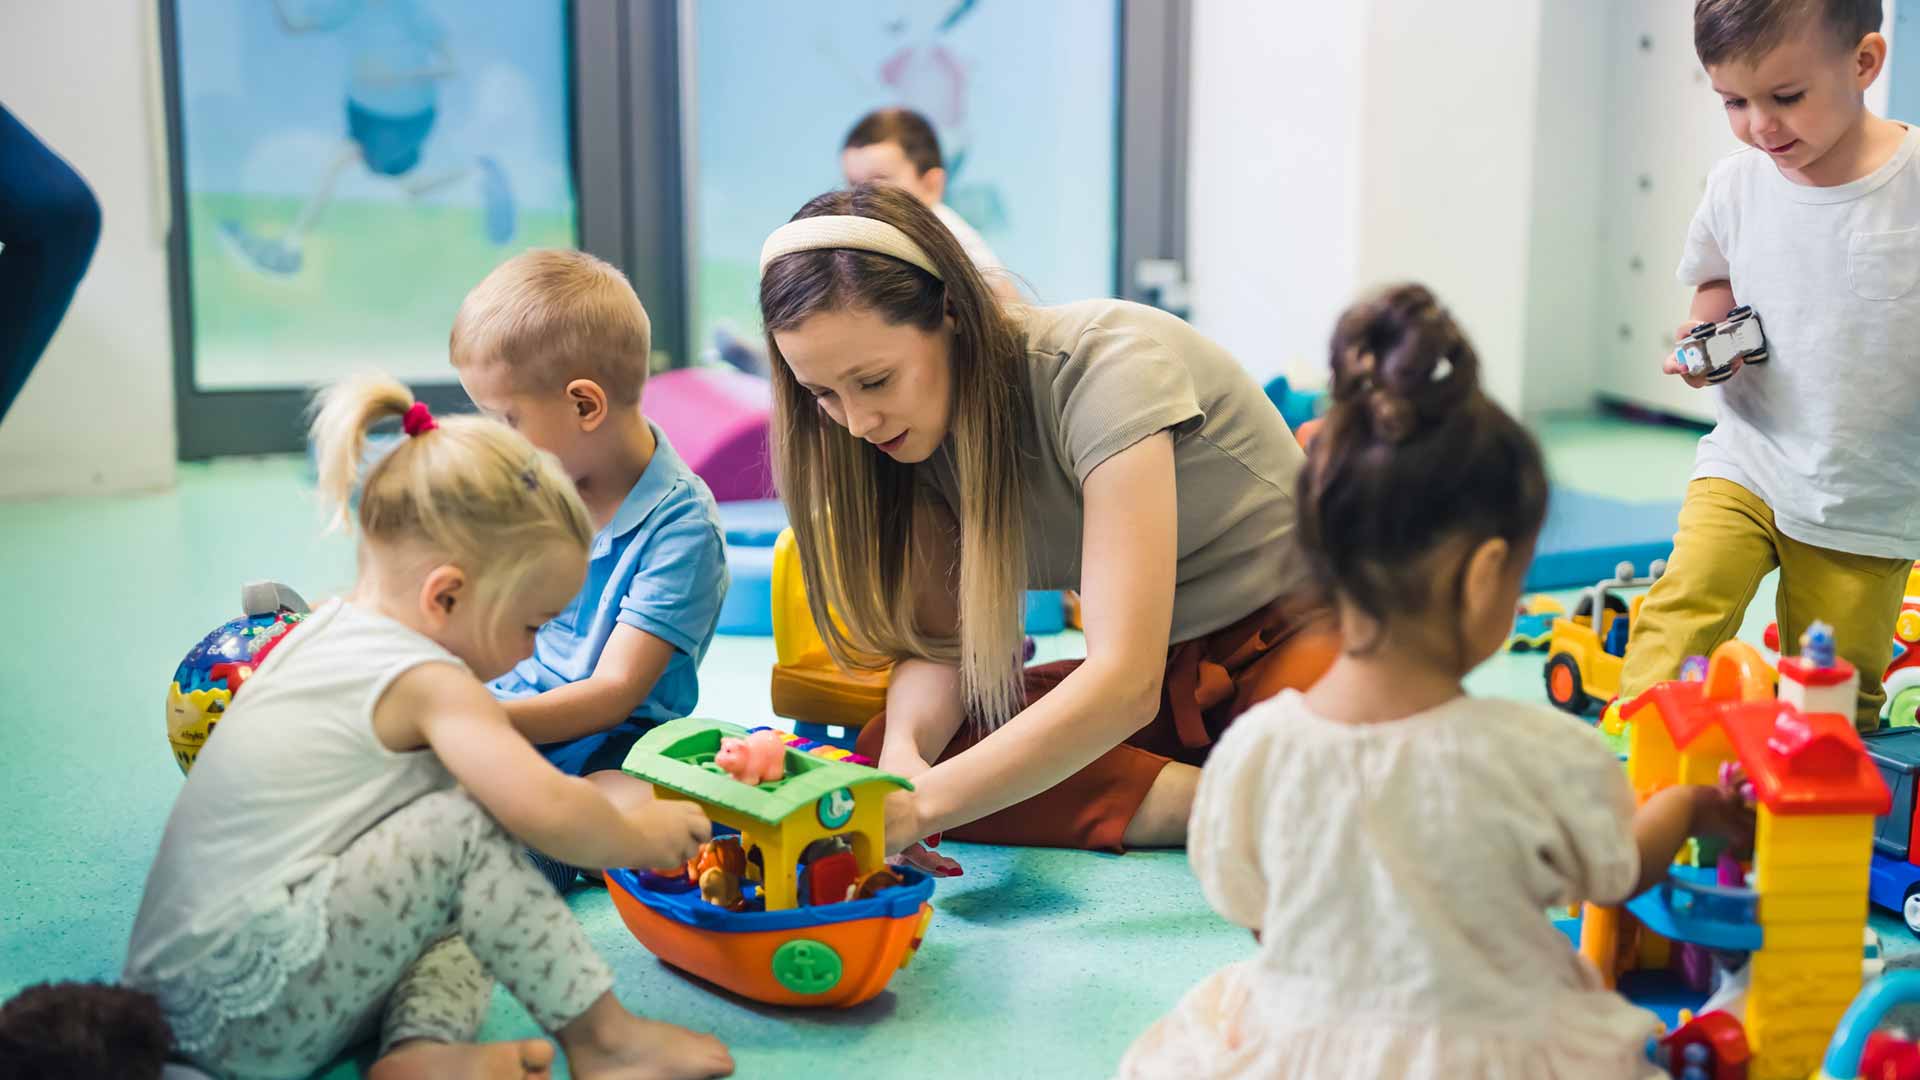 Childcare Options in France - 044_Education_primaire_AdobeStock_117888873_1920x1080